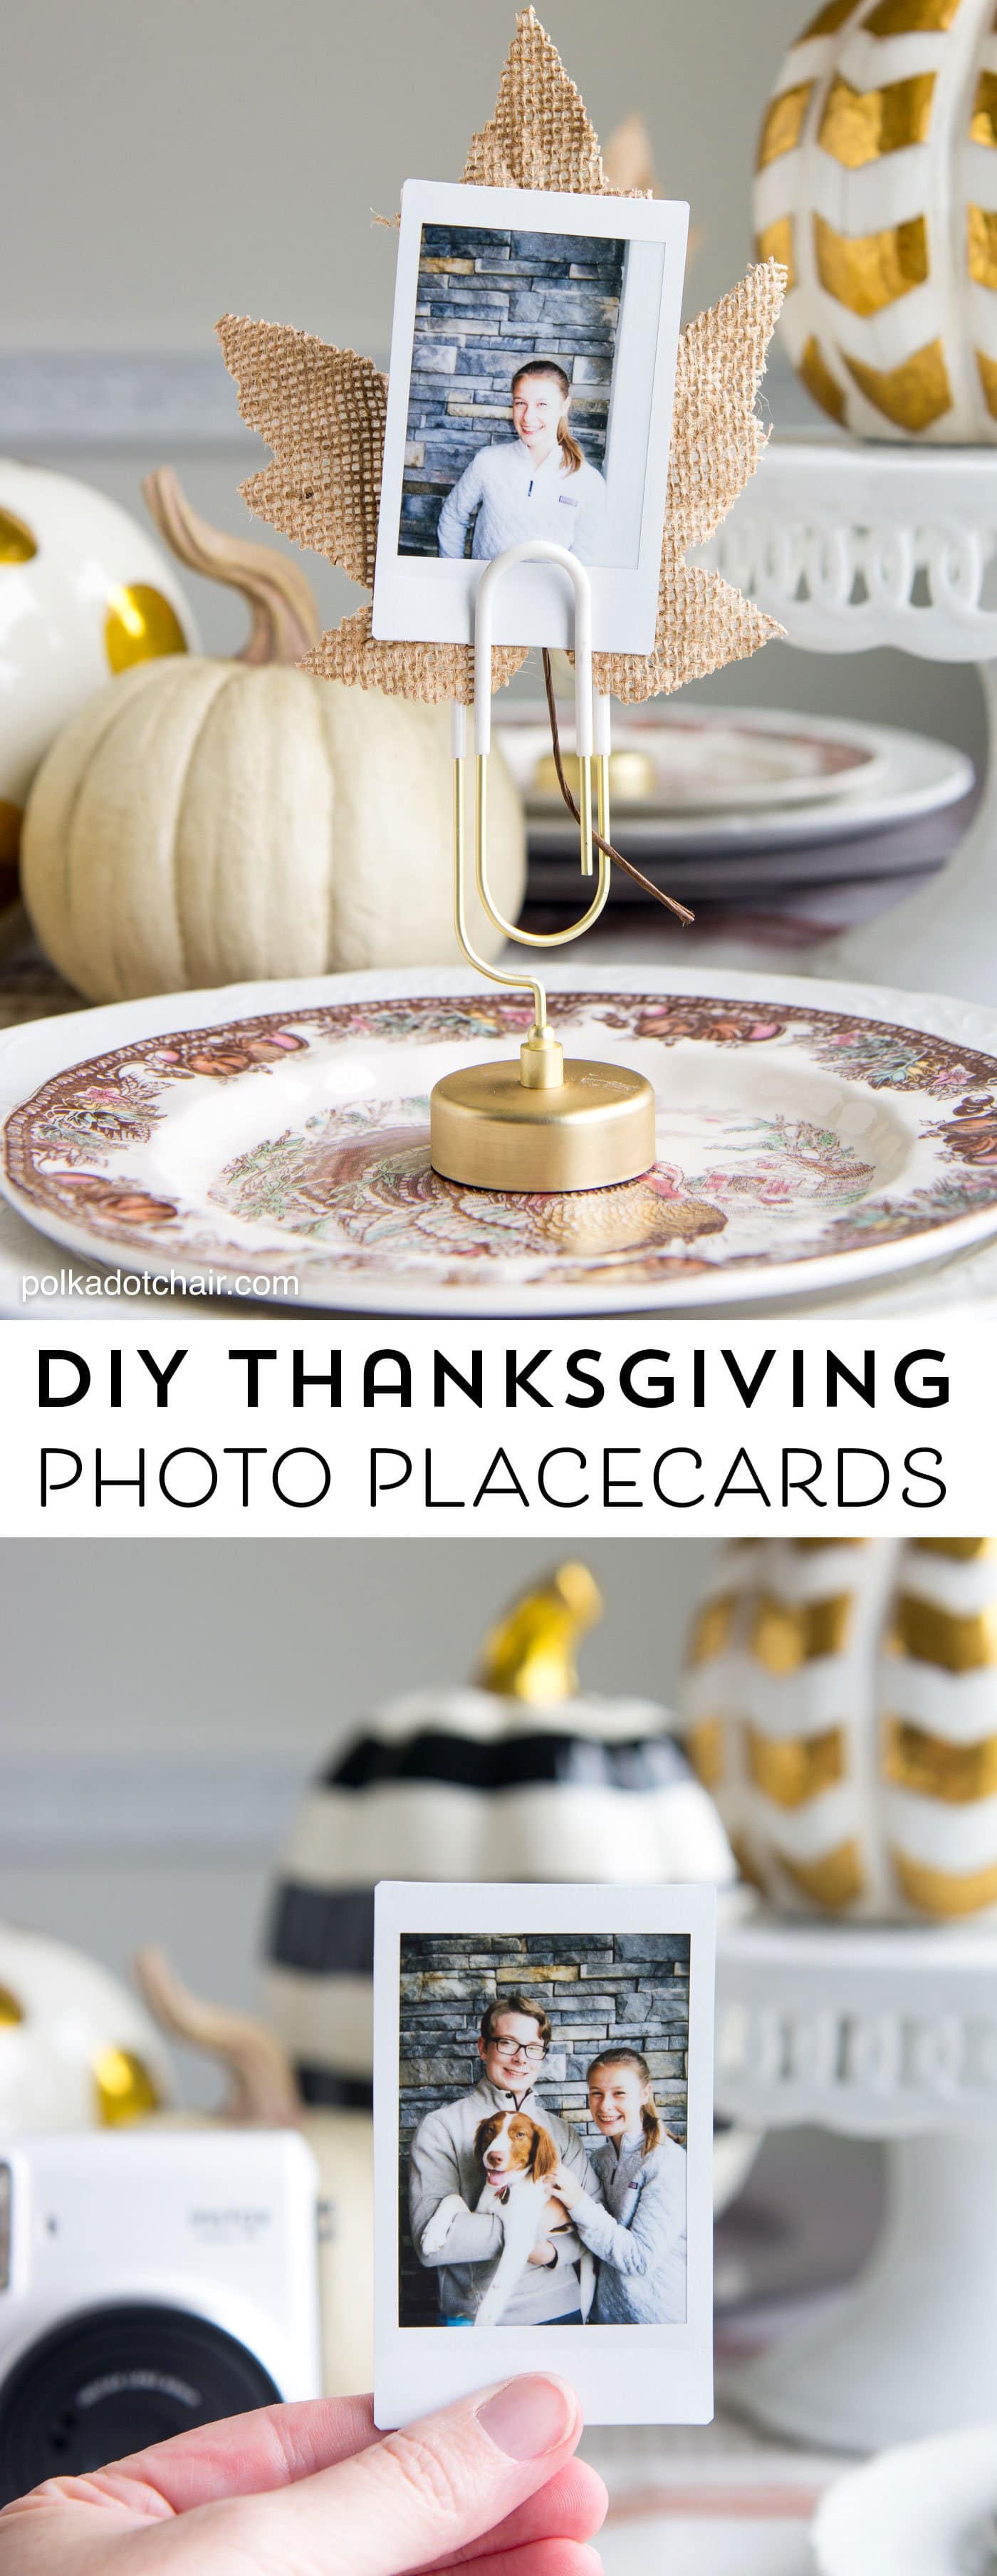 15-thanksgiving-place-cards-diy-place-card-ideas-for-the-holidays